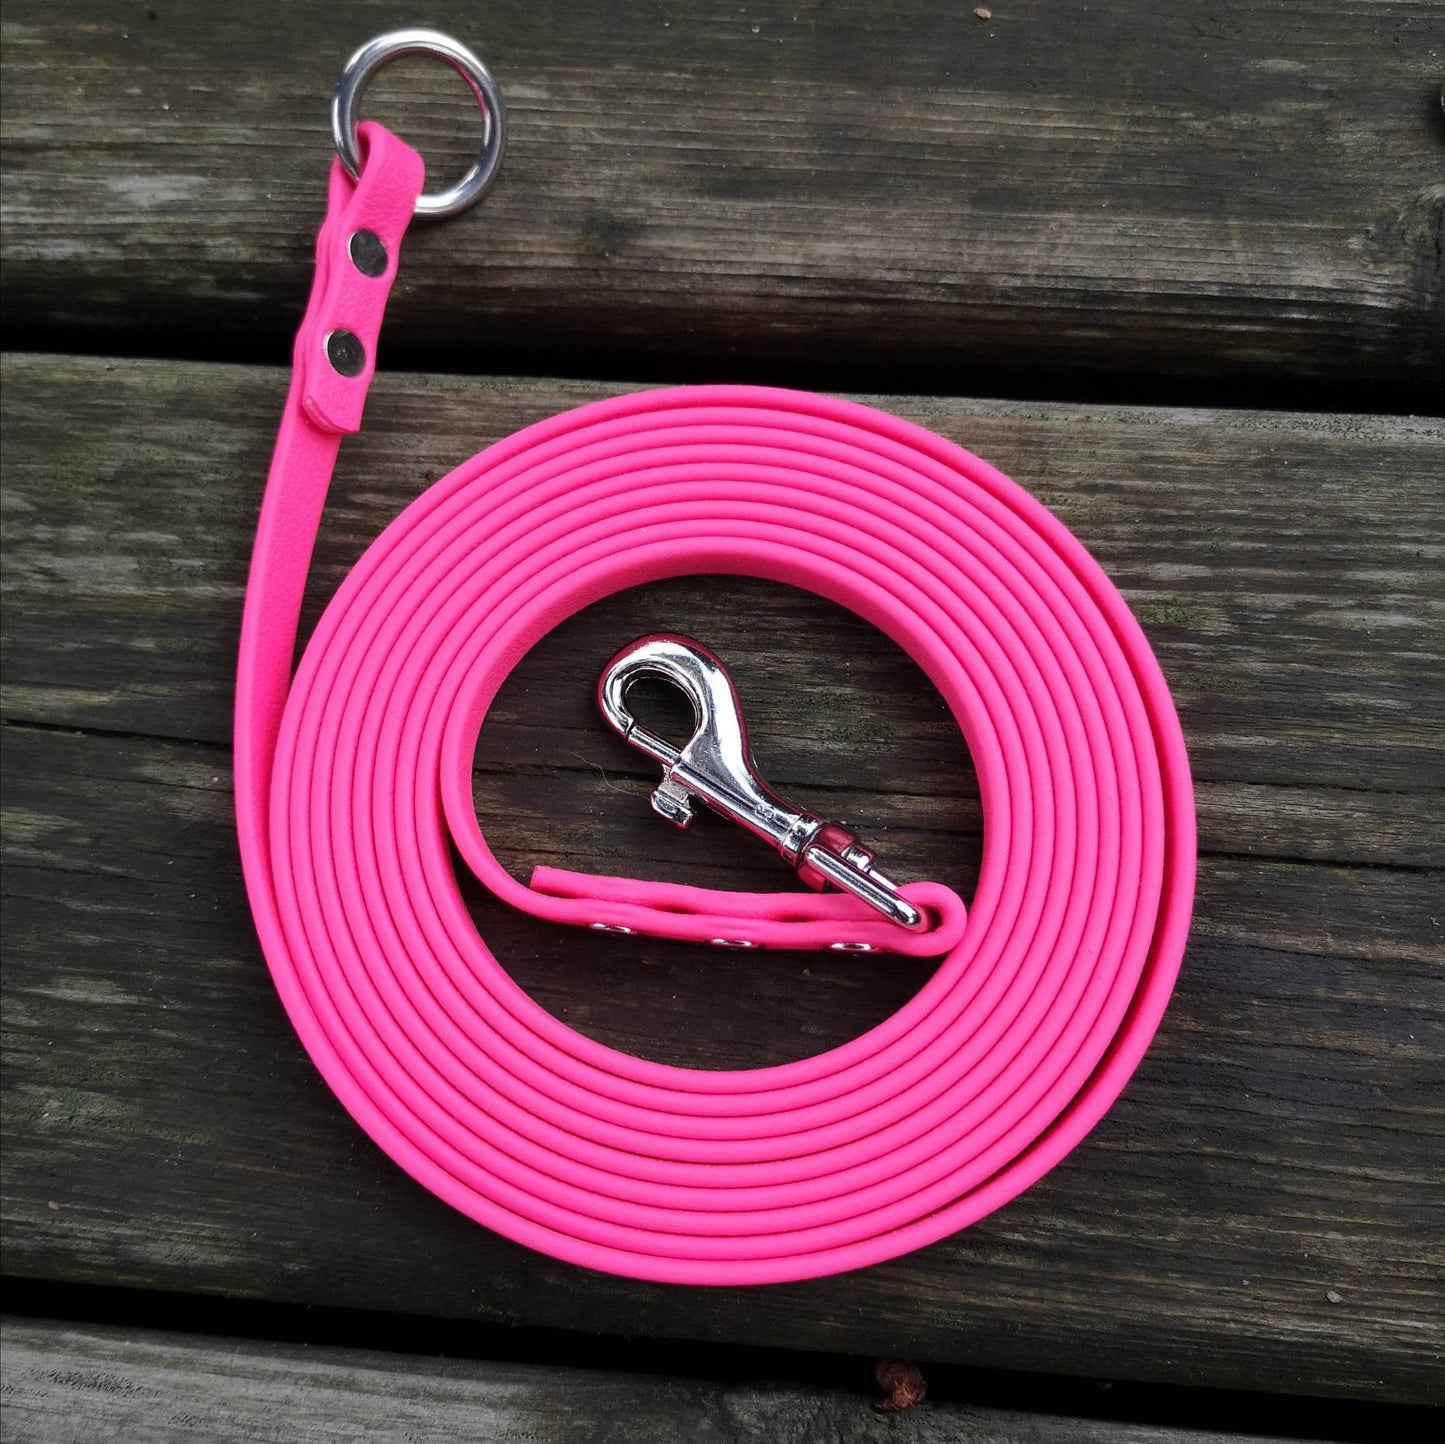 Magenta with a finished end with a ring